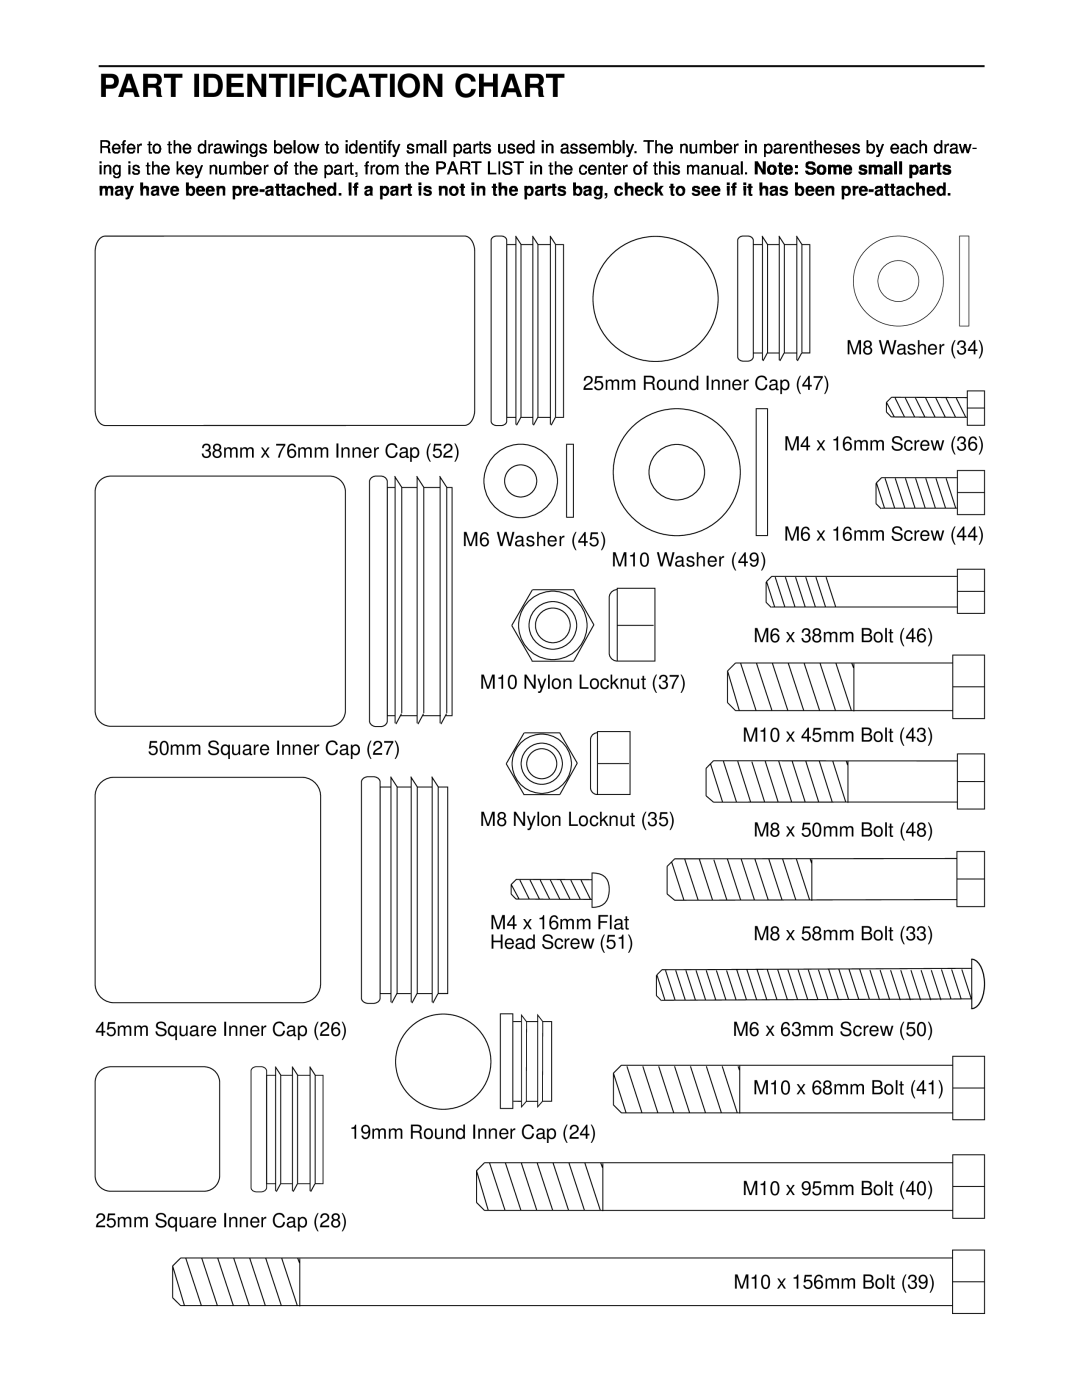 Gold's Gym GGBE14821, XR15 manual Part Identification Chart 